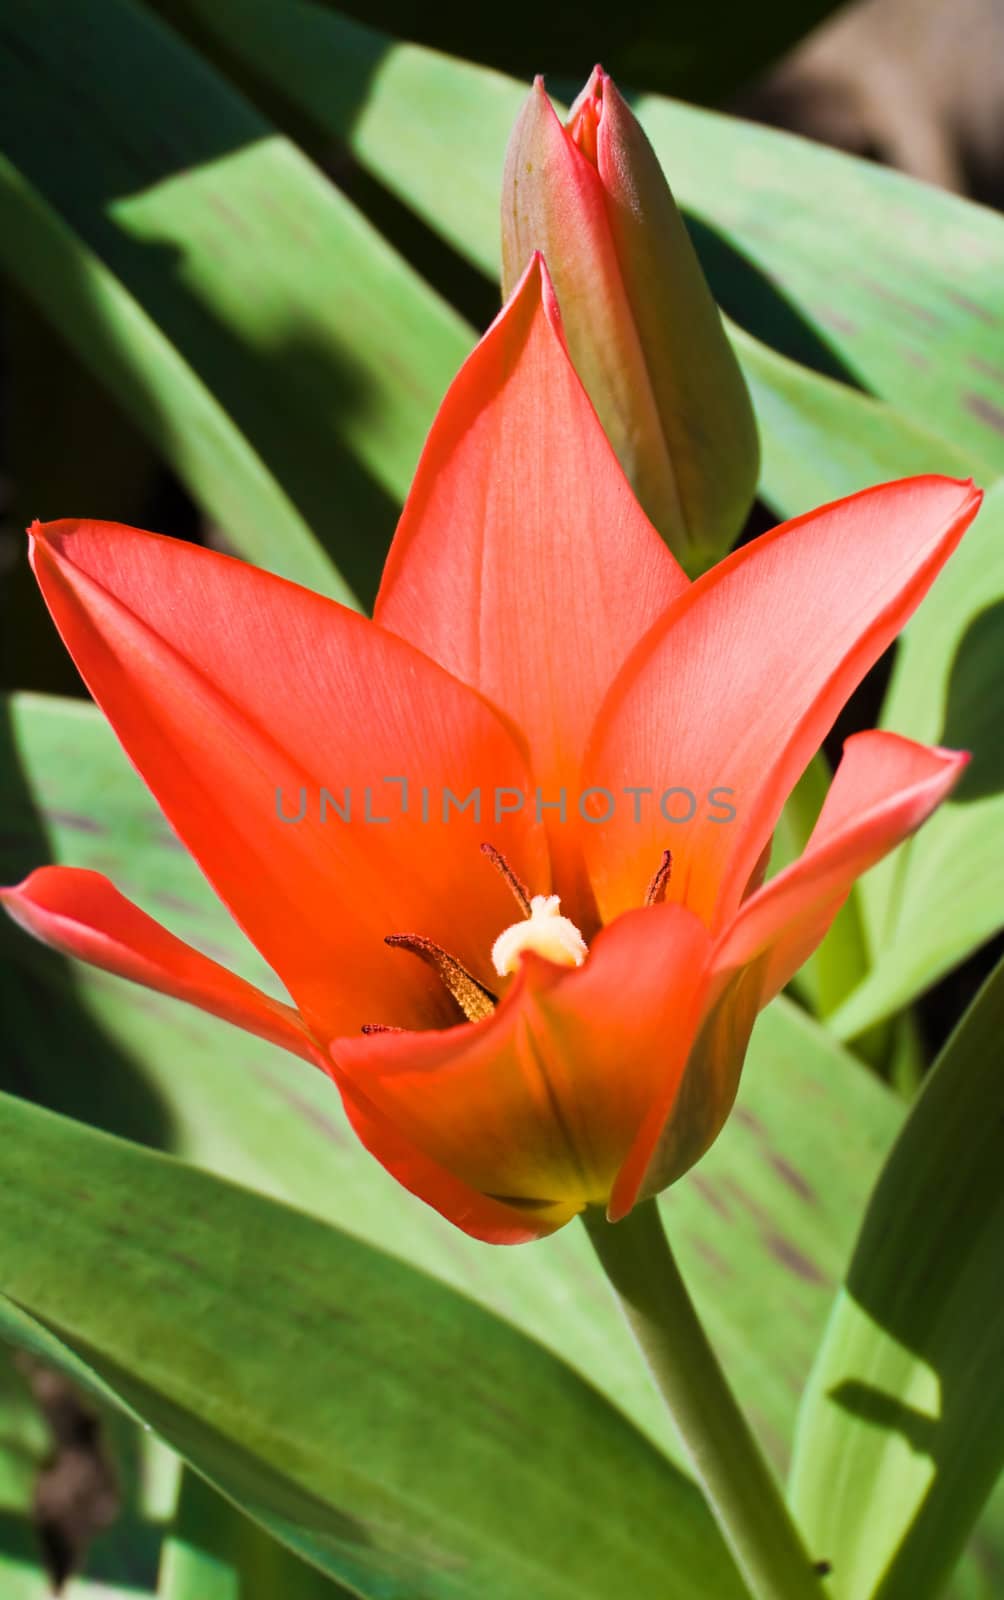 This image shows a red tulip